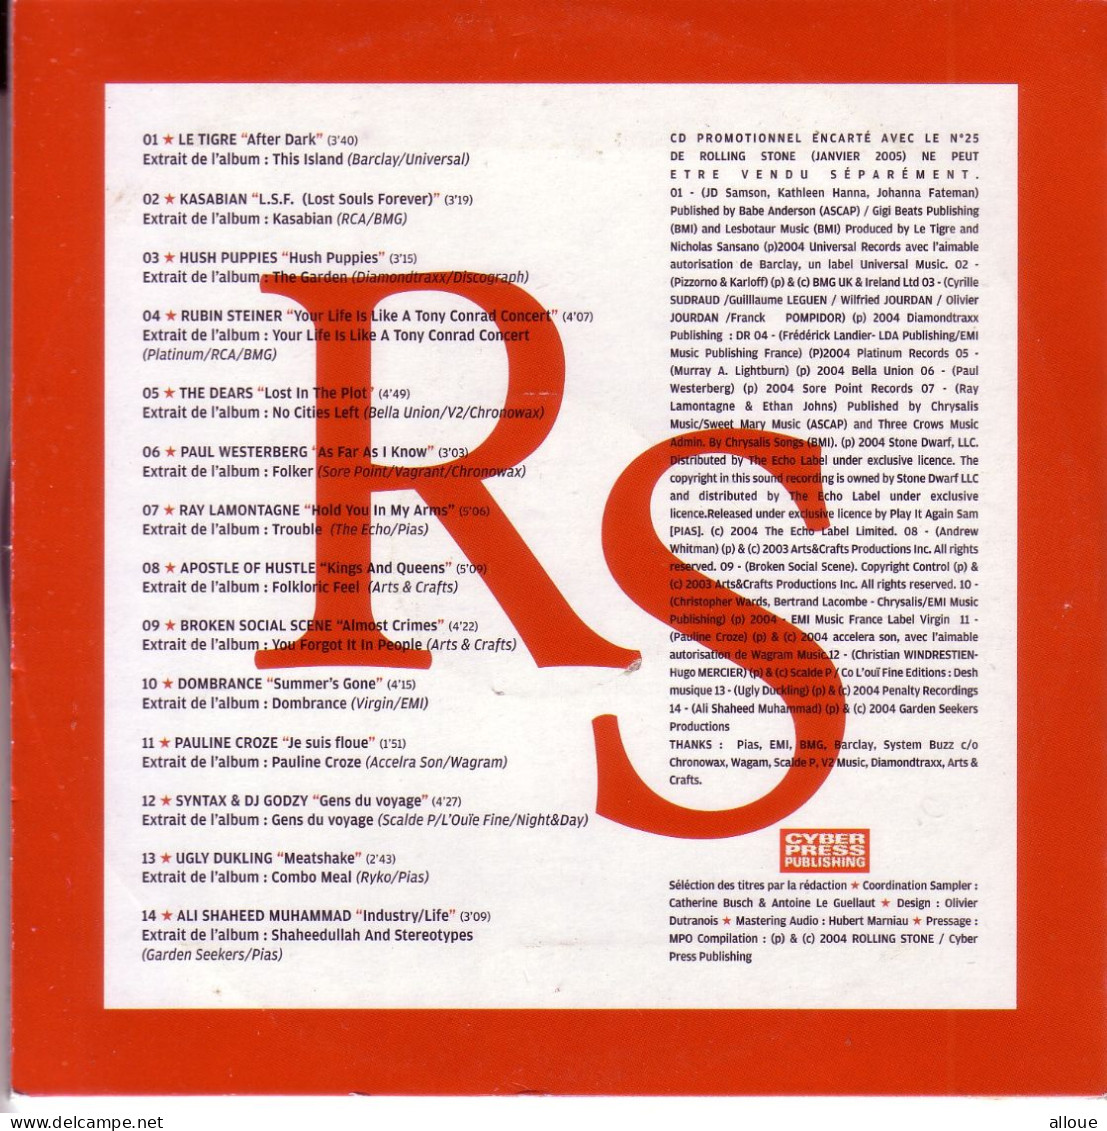 RS SAMPLER - CD ROLLING STONE MAGAZINE - POCHETTE CARTON 14 TRACKS - LE TIGRE, KASABIAN, HUSH PUPPIES AND MORE - Other - English Music